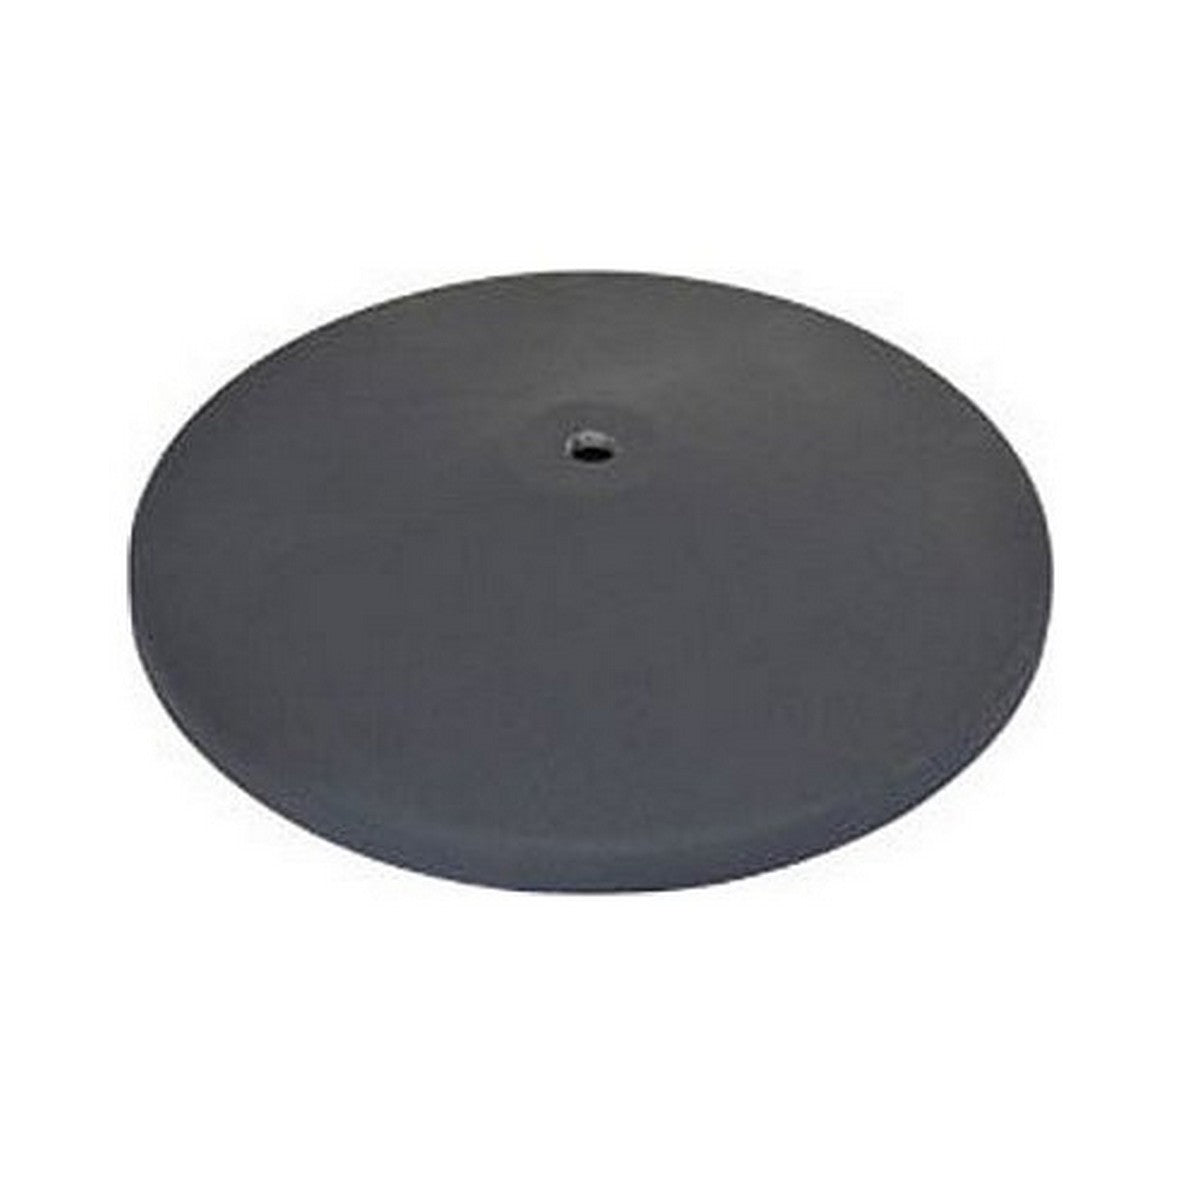 Earthworks FWCIB | Cast Iron Base for All models of FlexWand Series